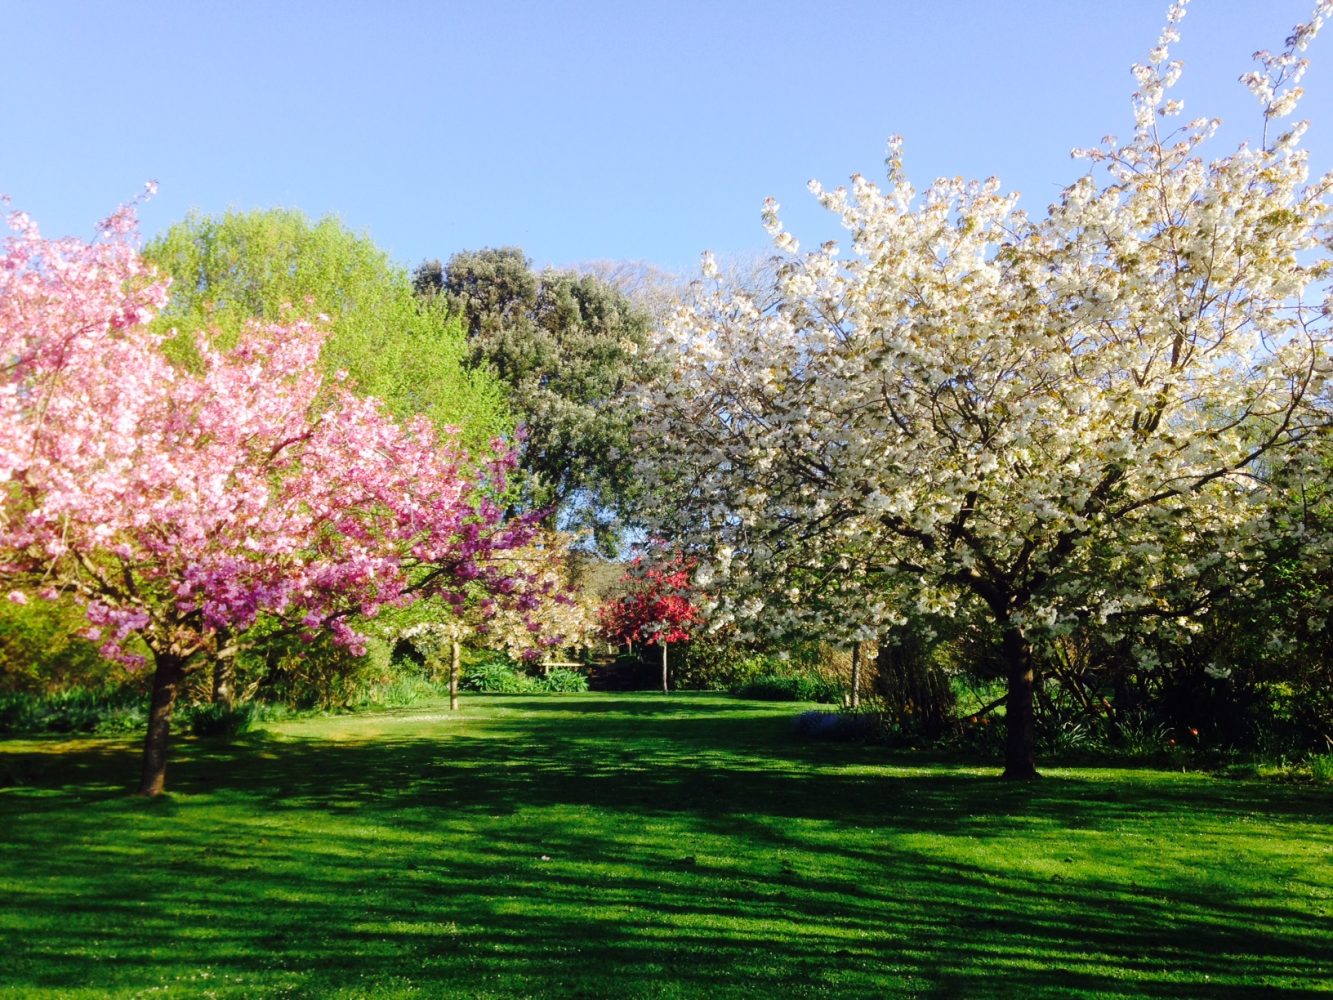 Pink and white cherry blossom trees in bloom at Highdown Gardens